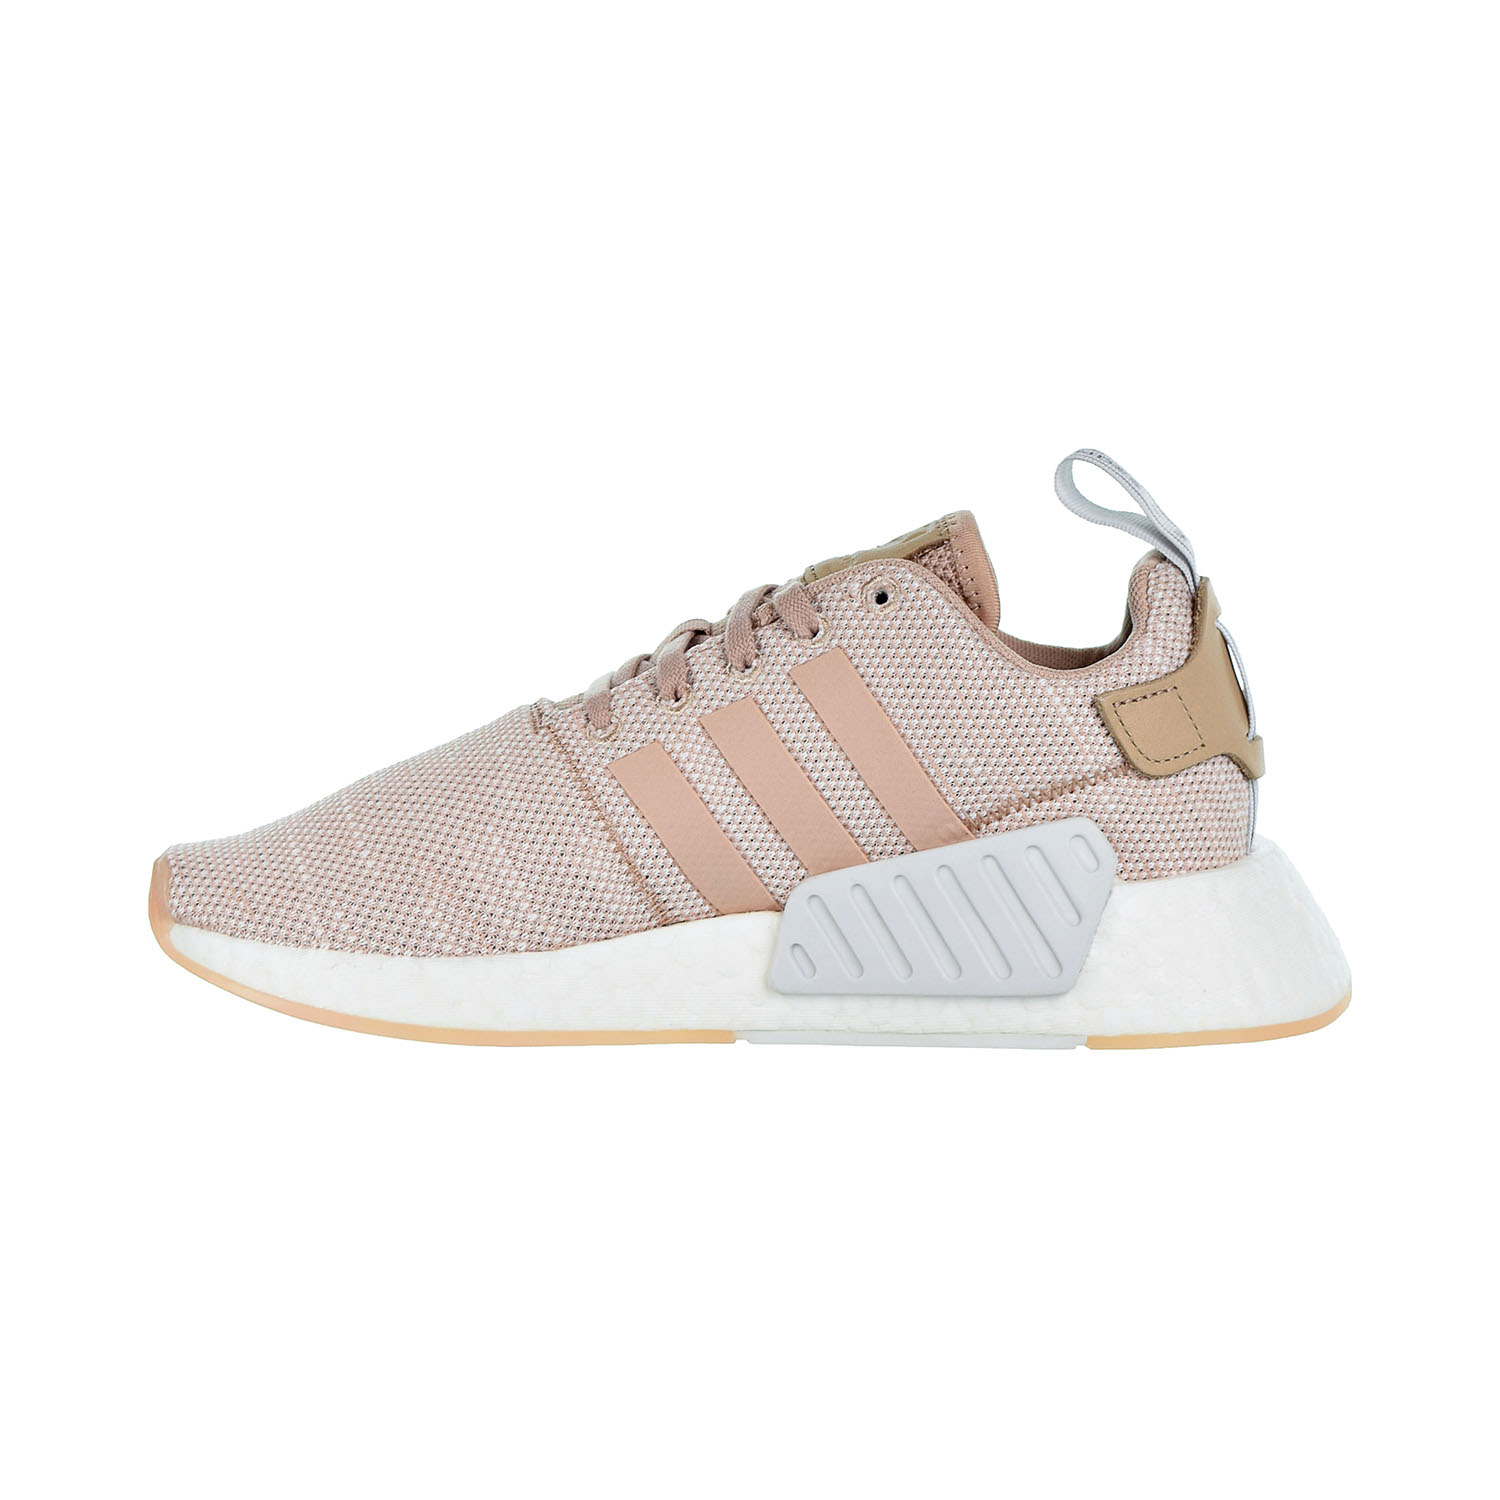 nmd_r2 shoes ash pearl